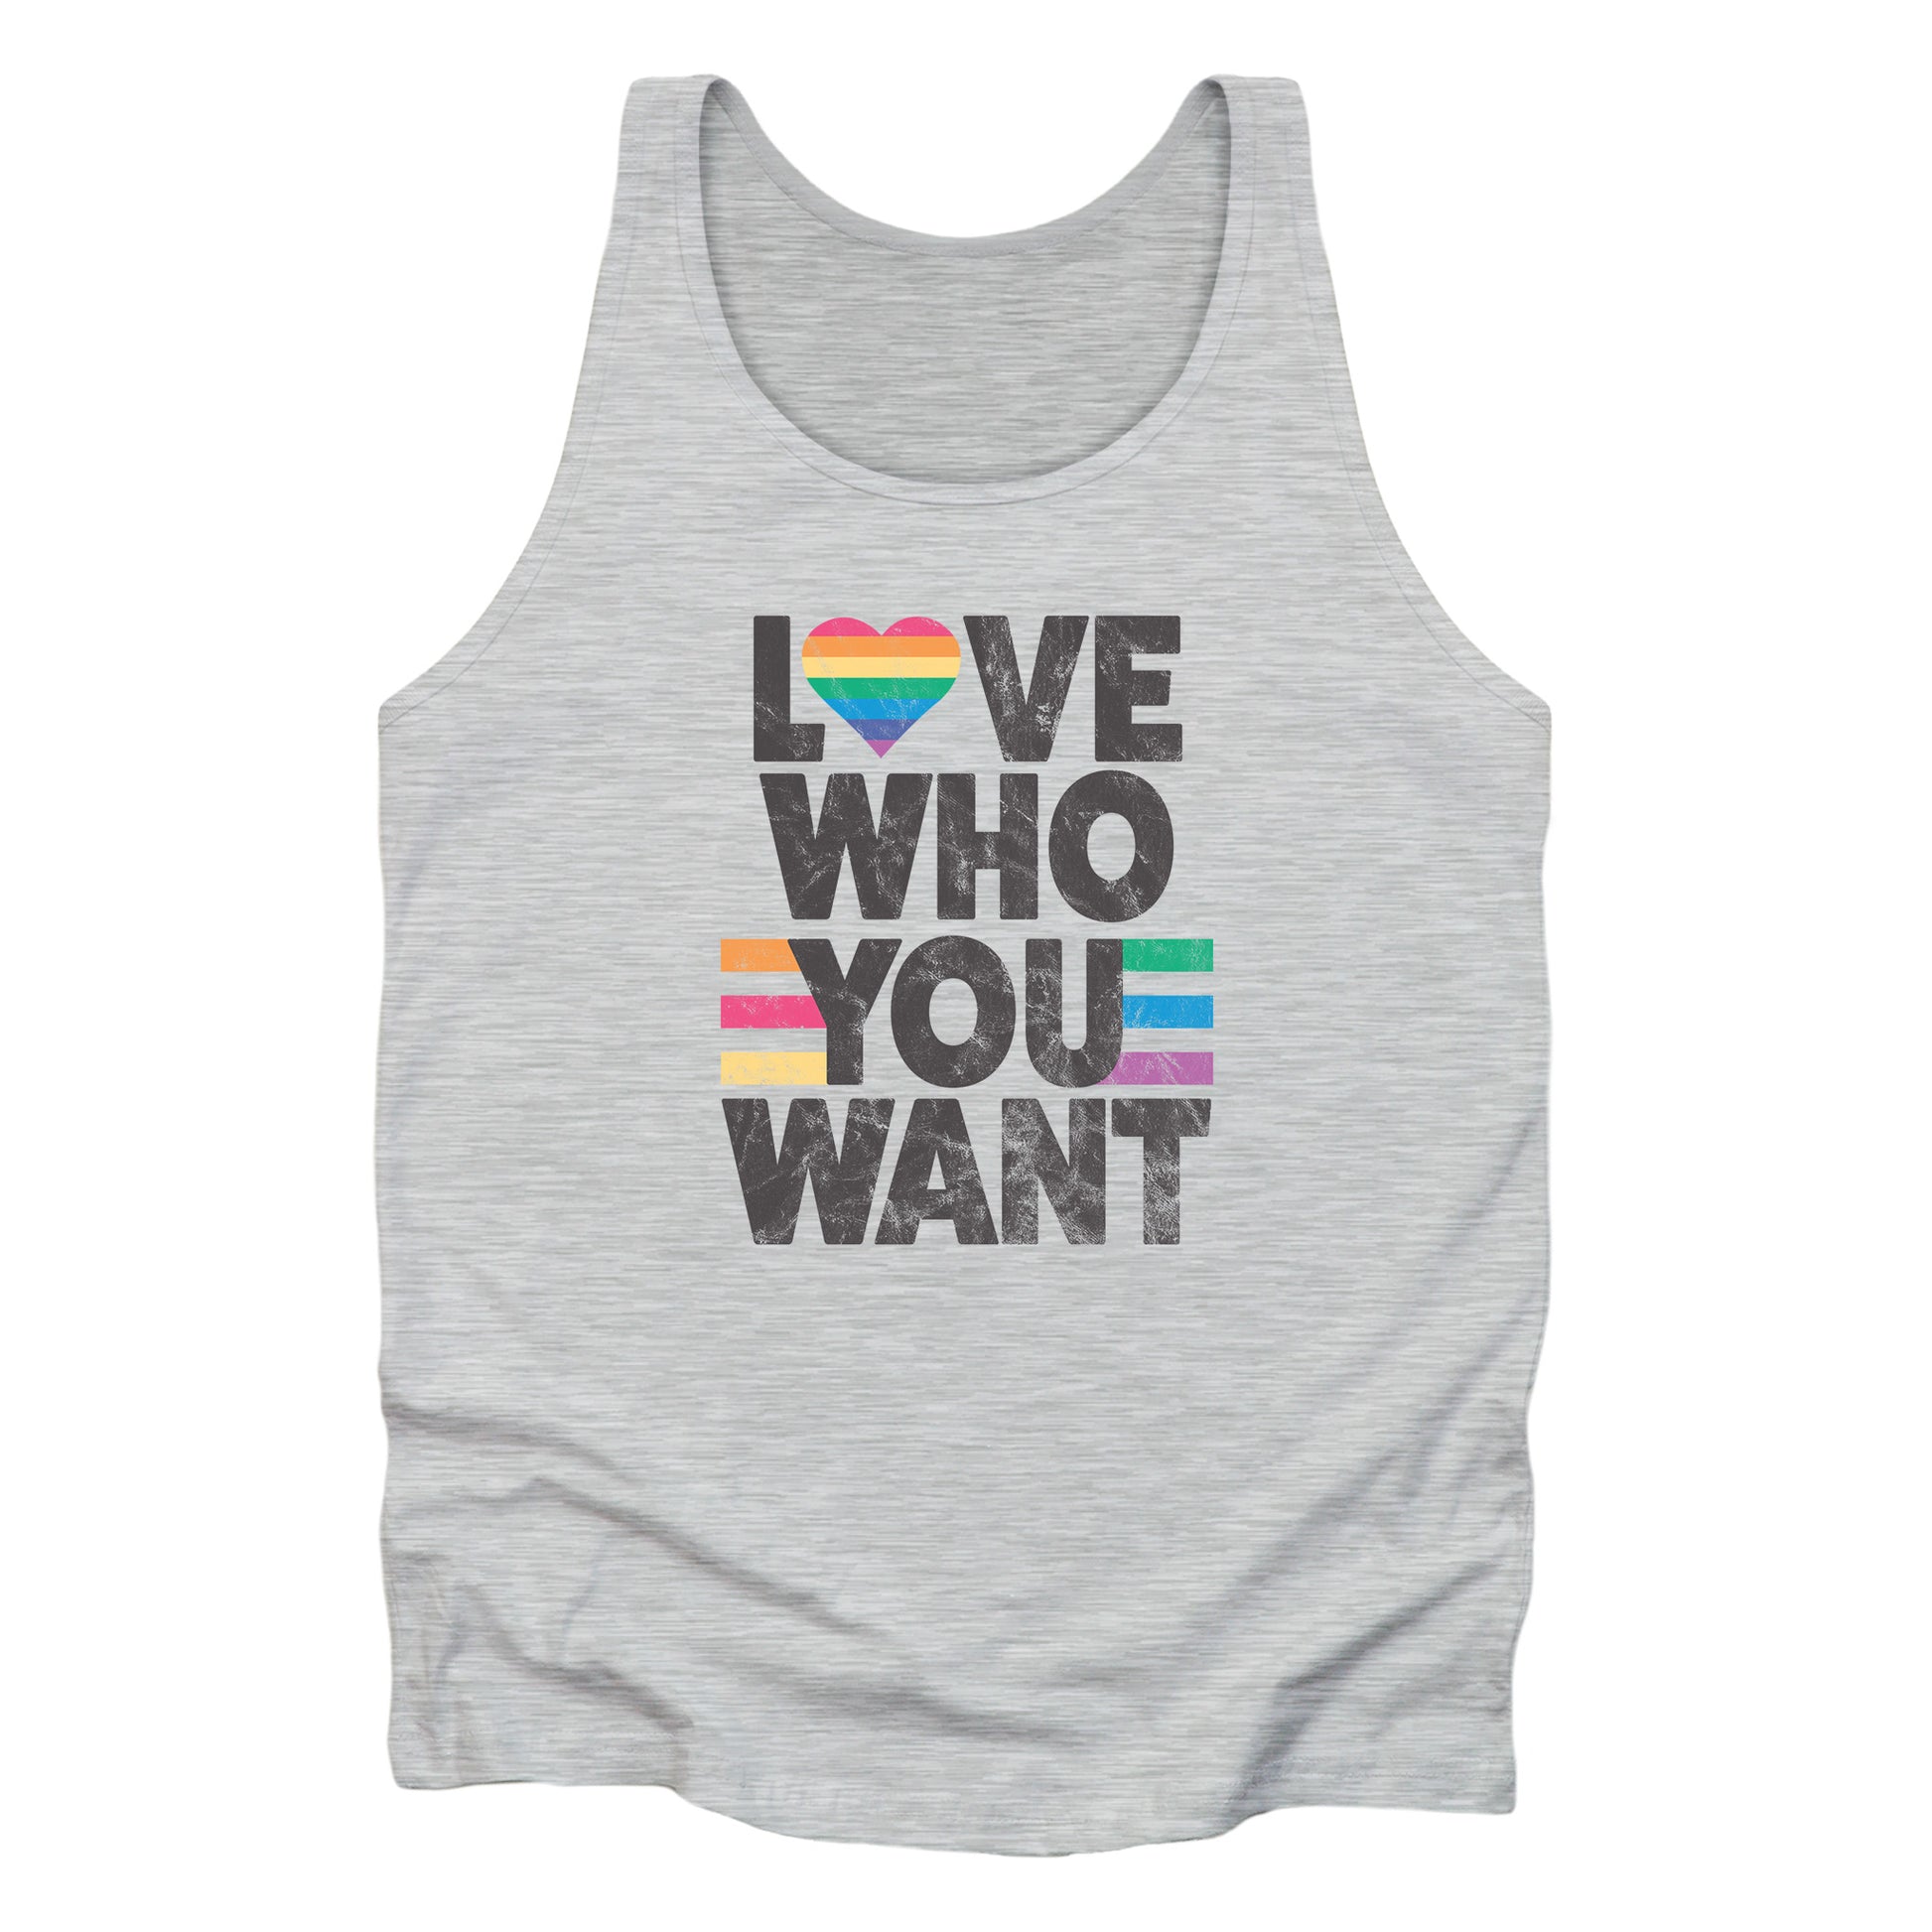 Athletic color unisex tank top that says, “Love who you want” in all caps. Each word is on its own line. The “O” in “love” is a rainbow heart.